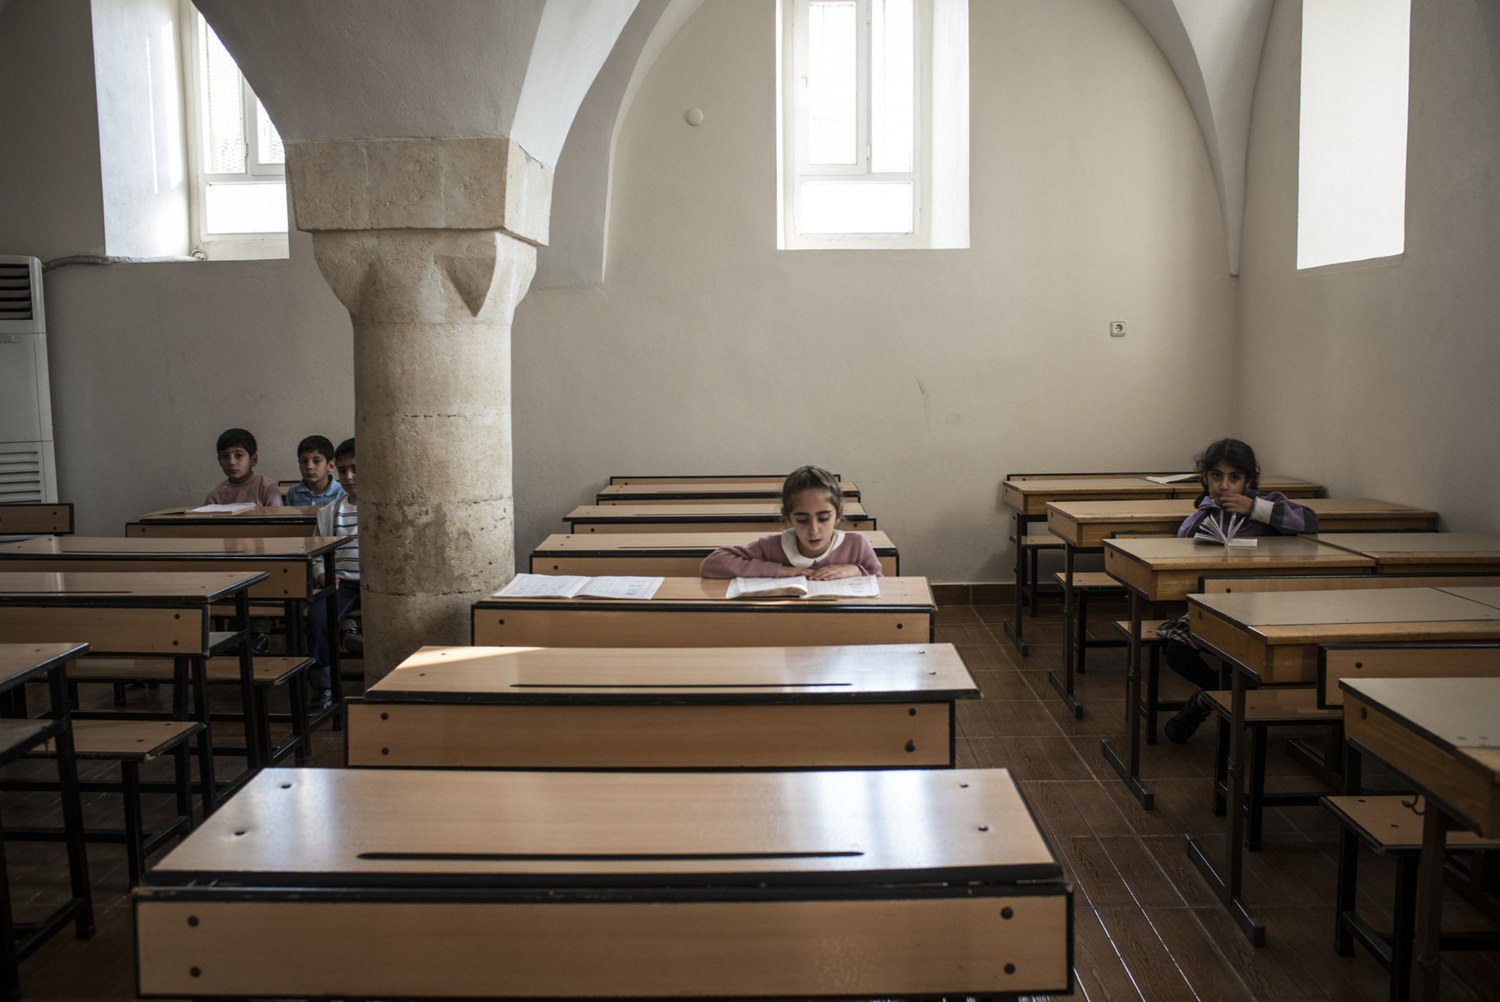  A girl reads during her Assyrian class in the classroom of Mor Barsaumo church on October 30th, 2014.

The Mor Barsaumo church is over 1,500 years old and was renovated in 1943. It is located 21 Şen Caddessi in Midyat, Turkey. 